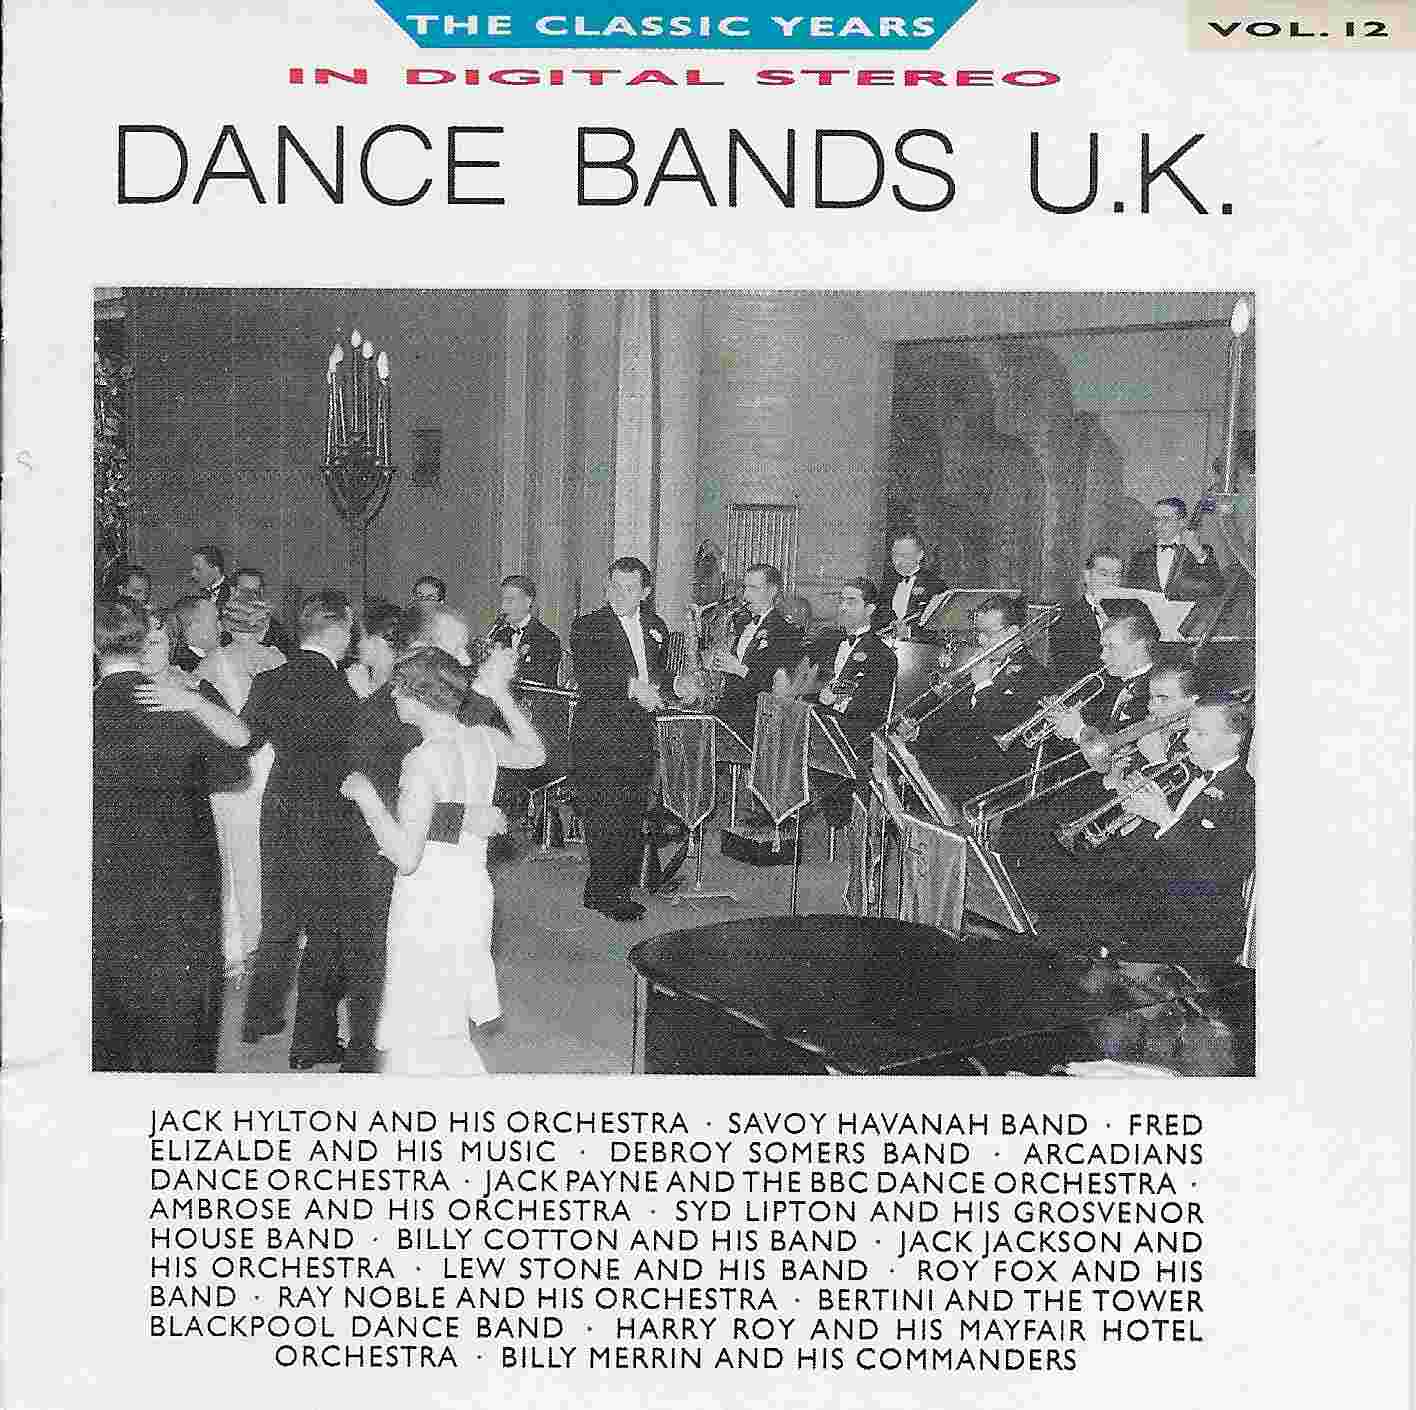 Picture of Classic years - Volume 12, Dance bands UK by artist Various from the BBC cds - Records and Tapes library